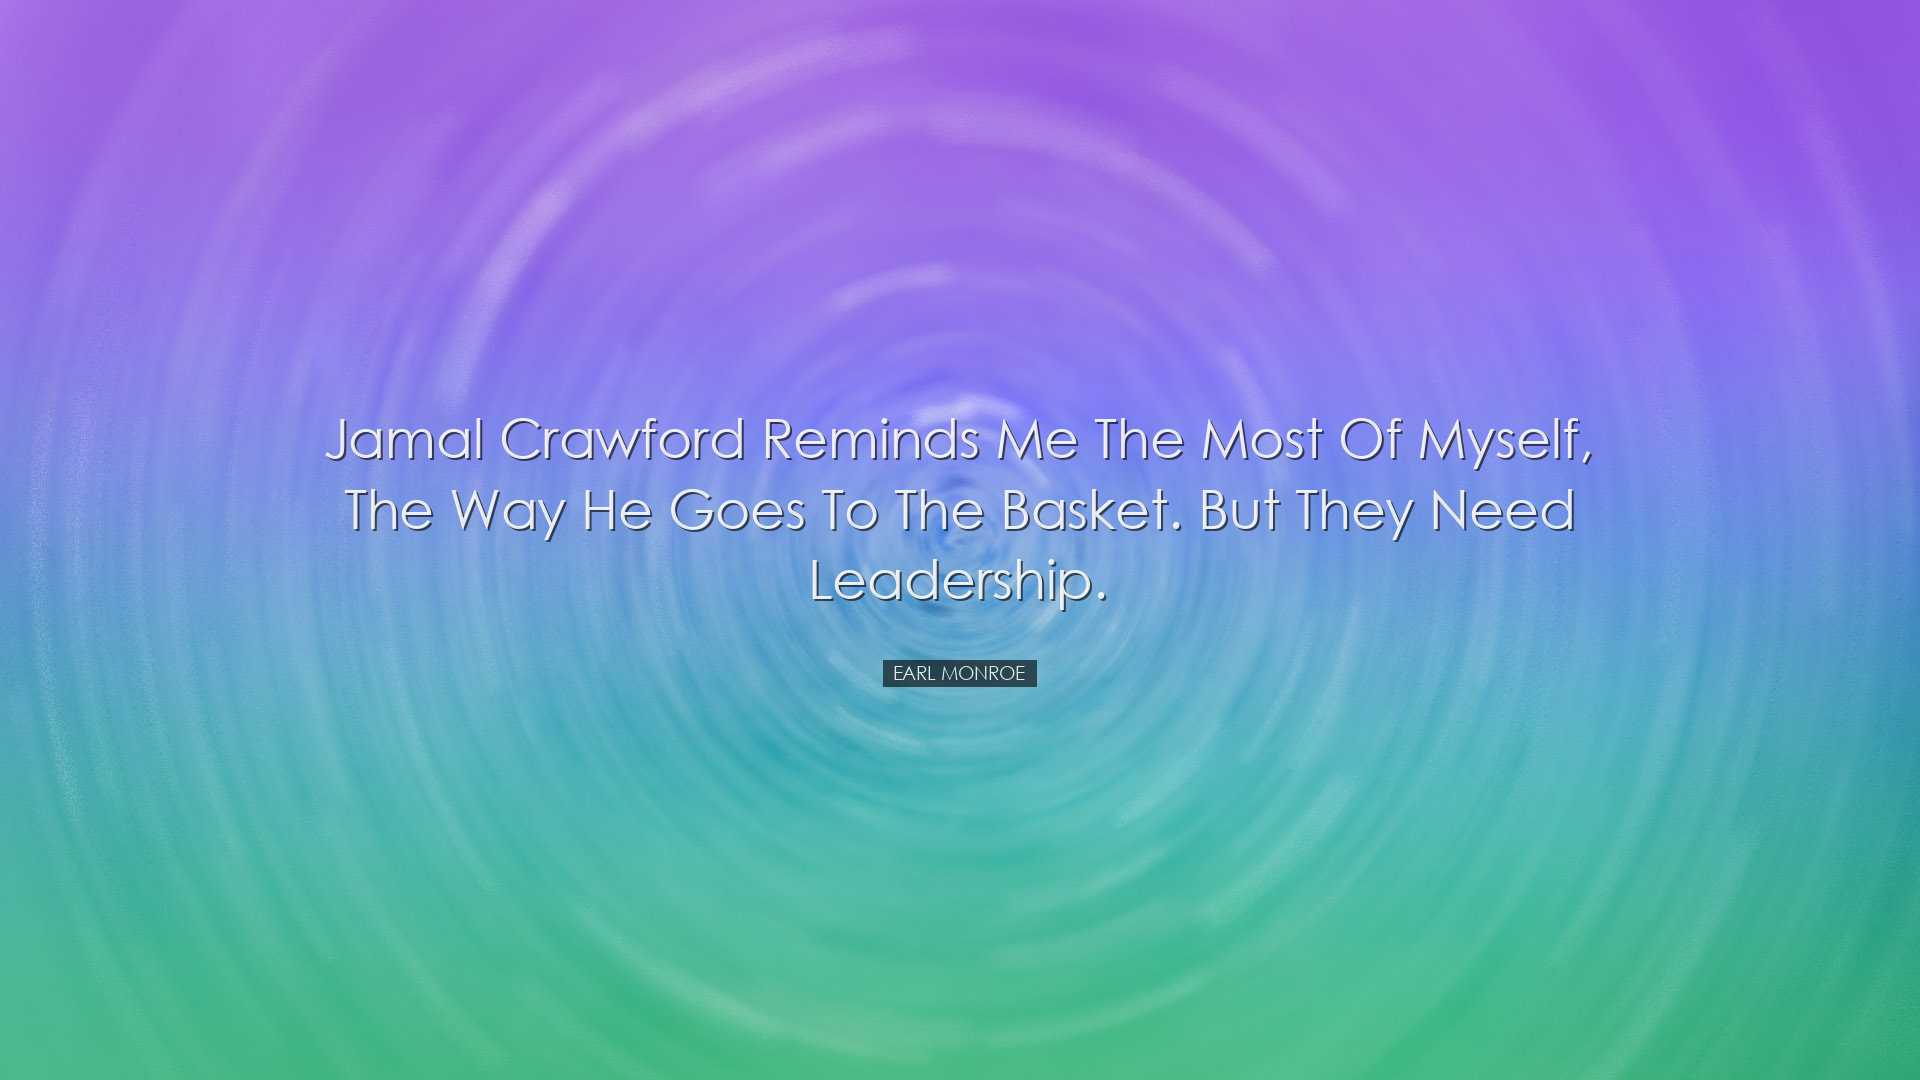 Jamal Crawford reminds me the most of myself, the way he goes to t